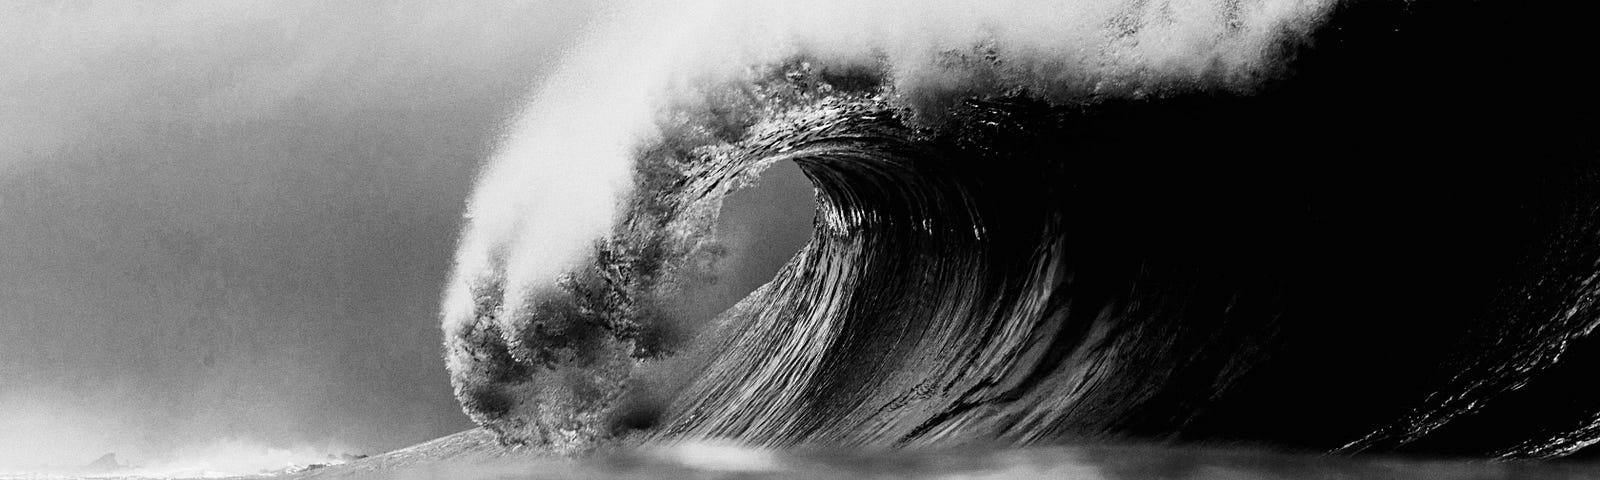 Black and white photo of a tsunami wave cresting.